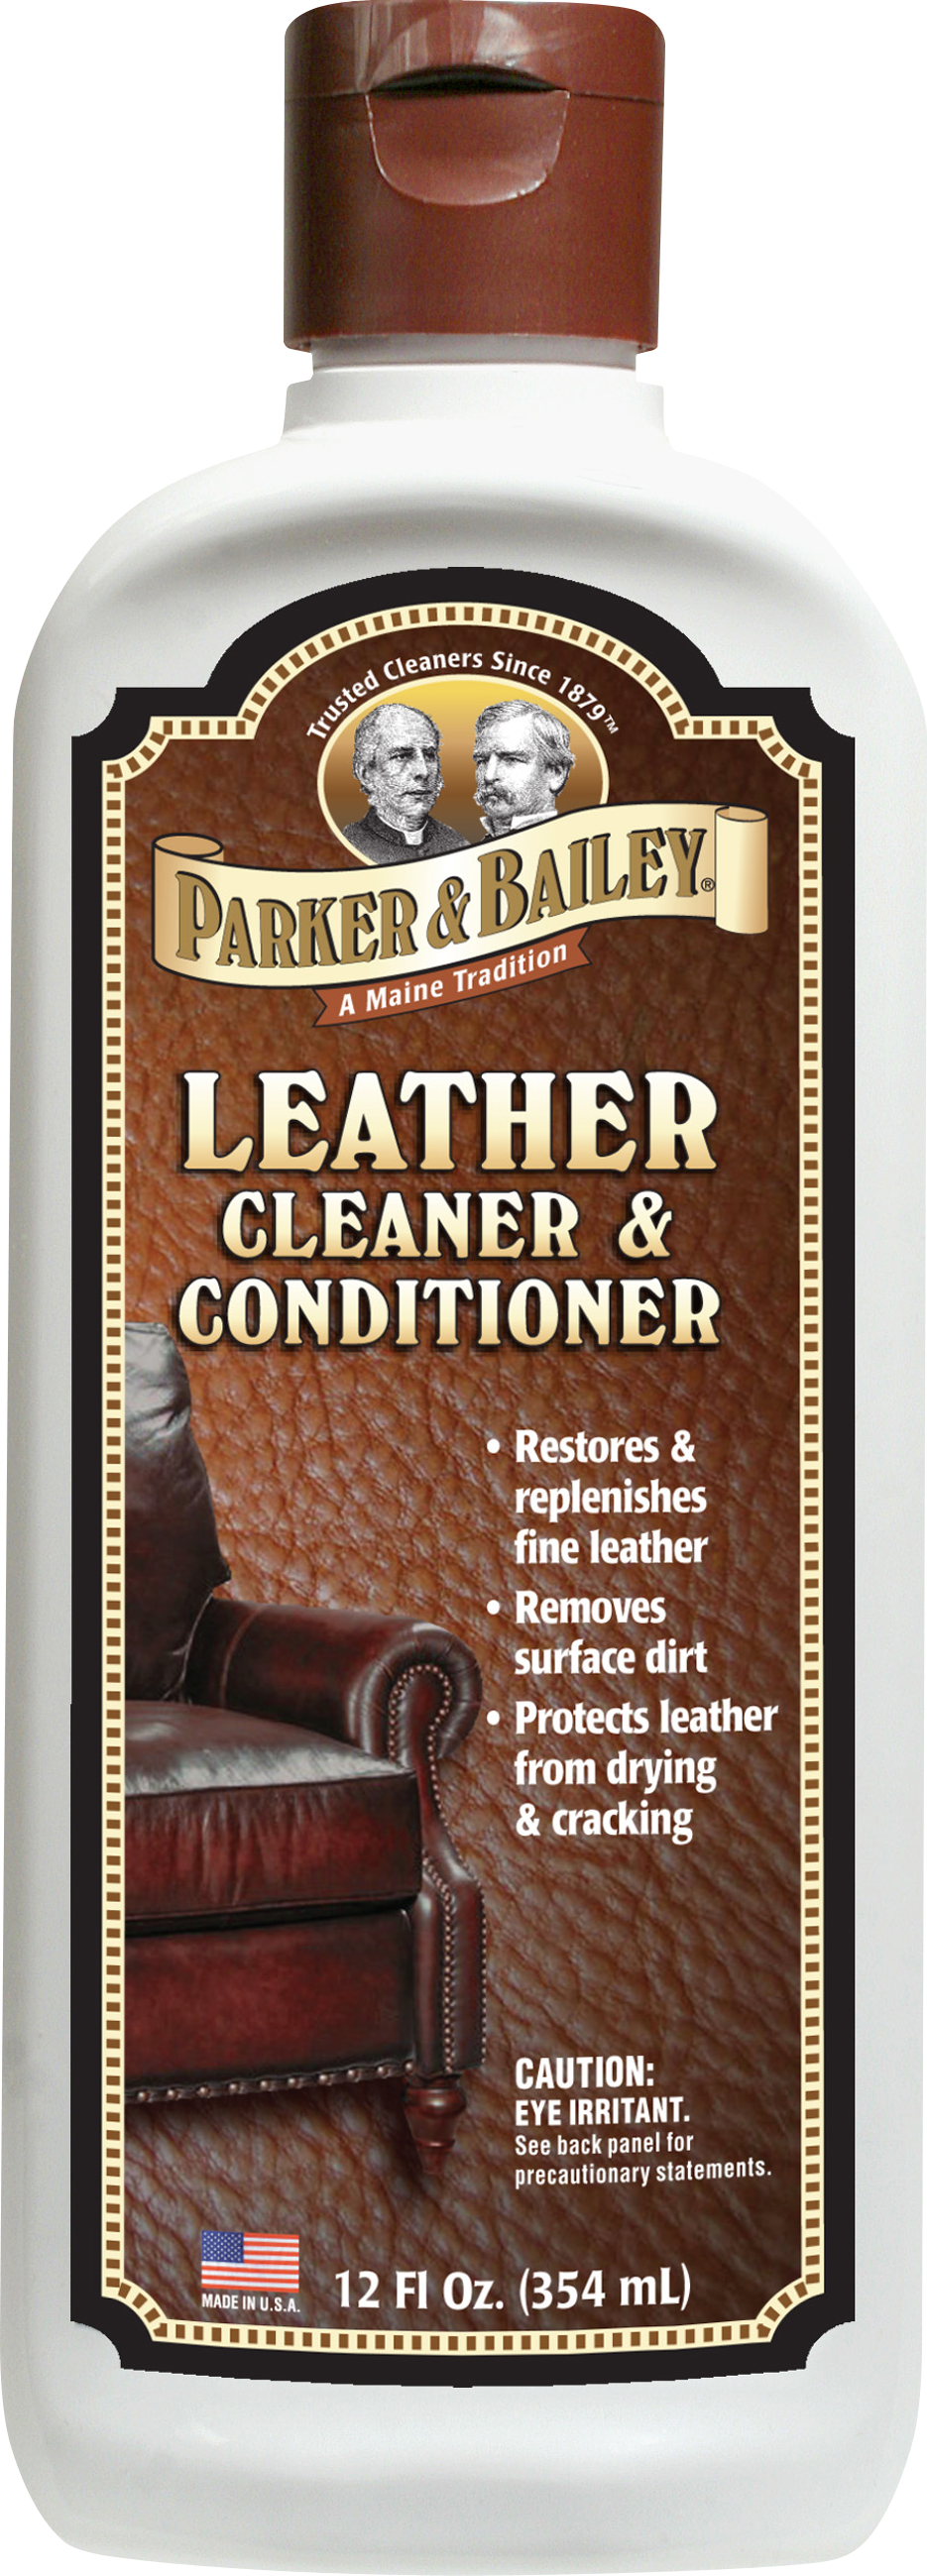 Parker & Bailey Leather Cleaner - 354ml